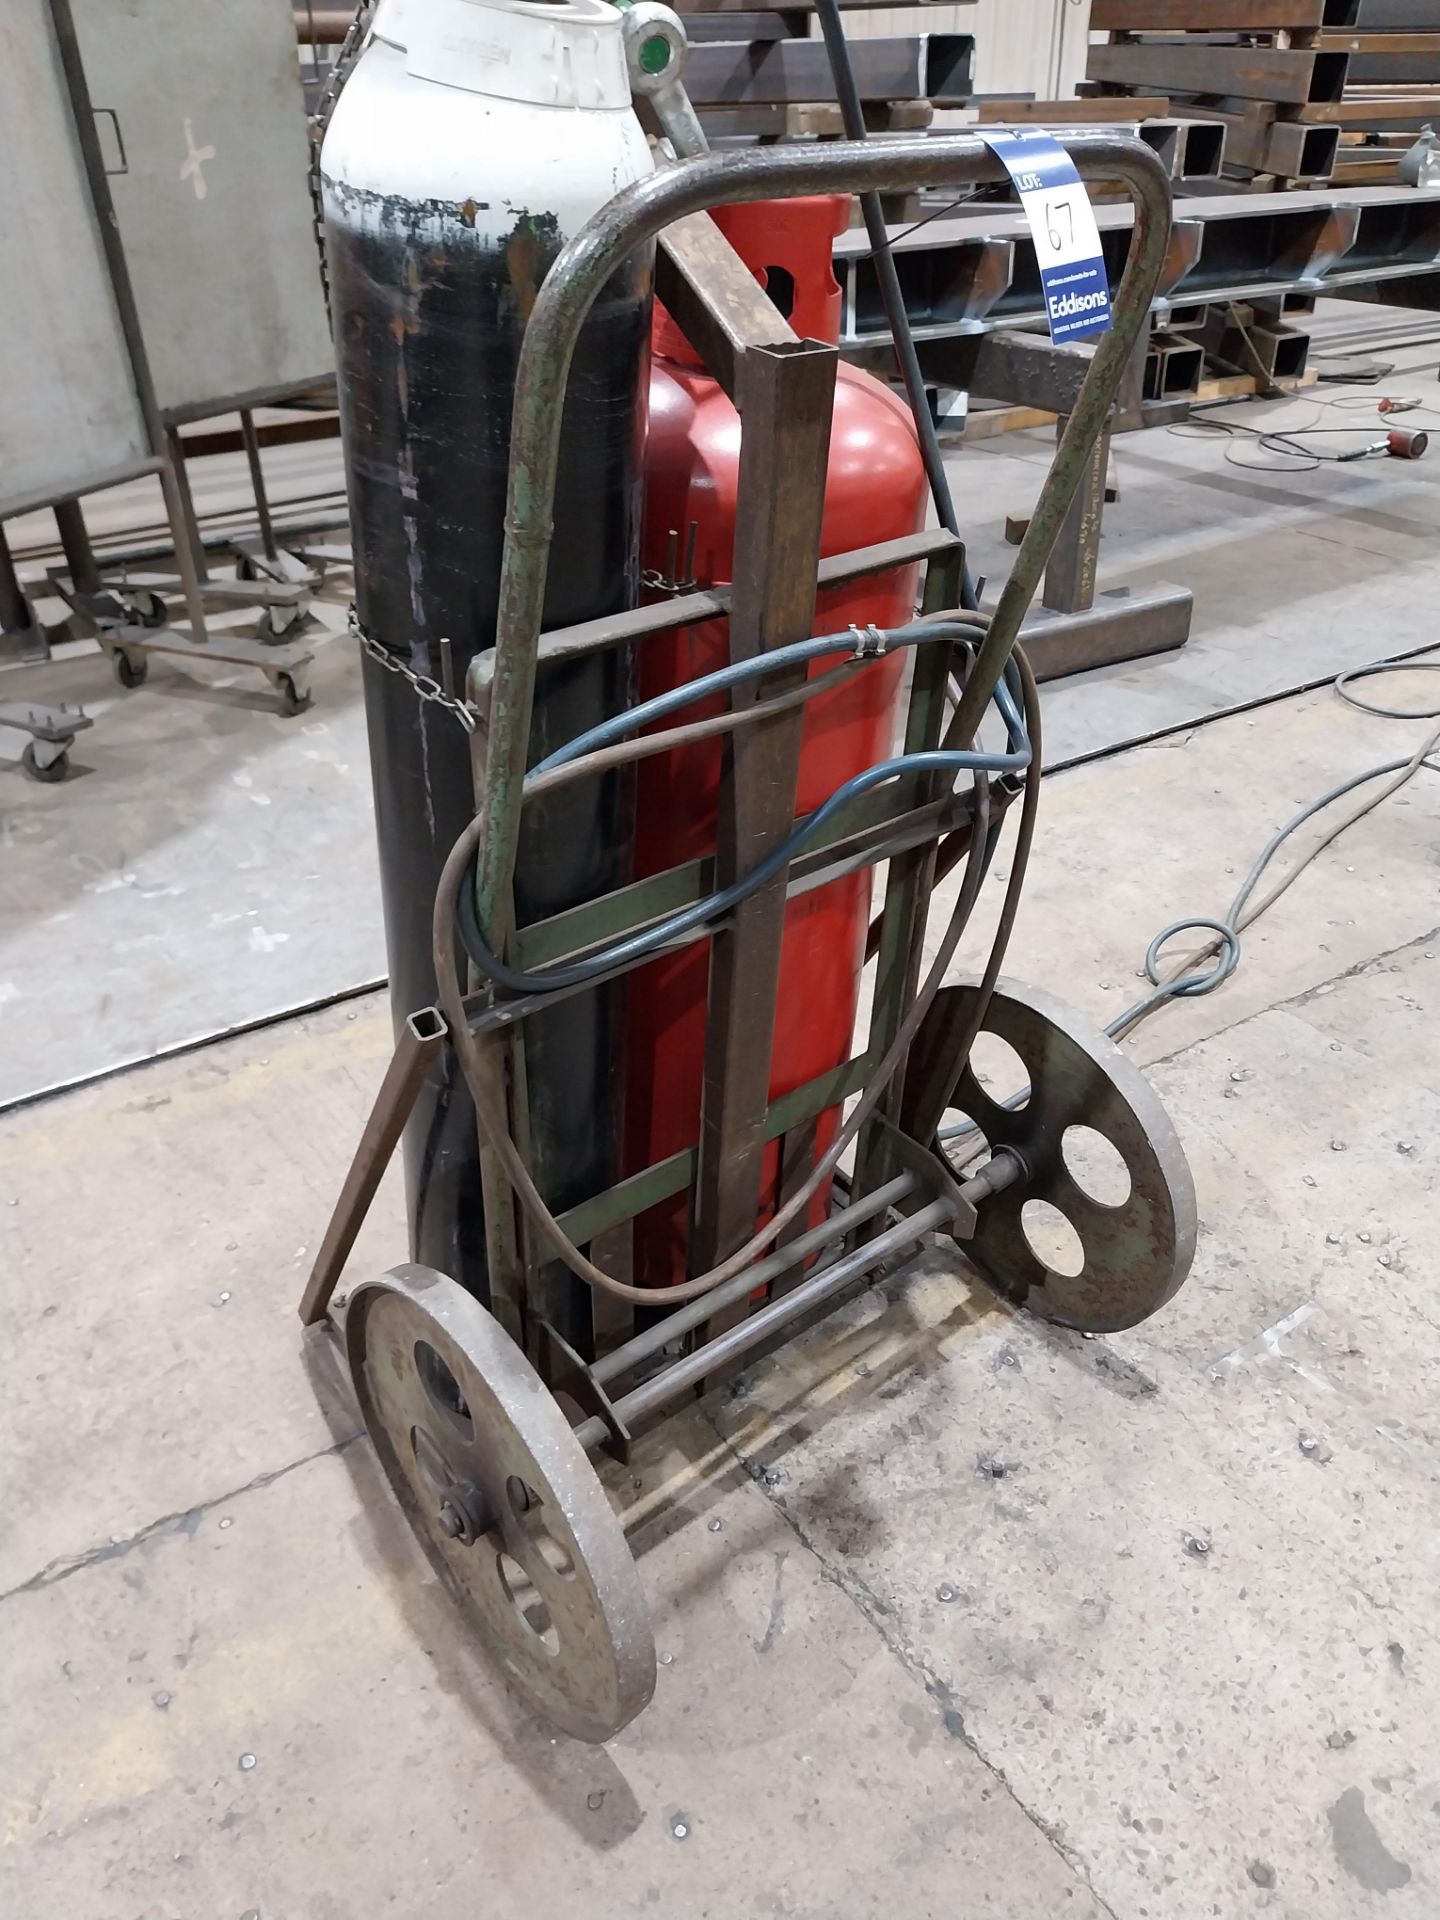 Bottle trolley and cutting torch (bottles not included)